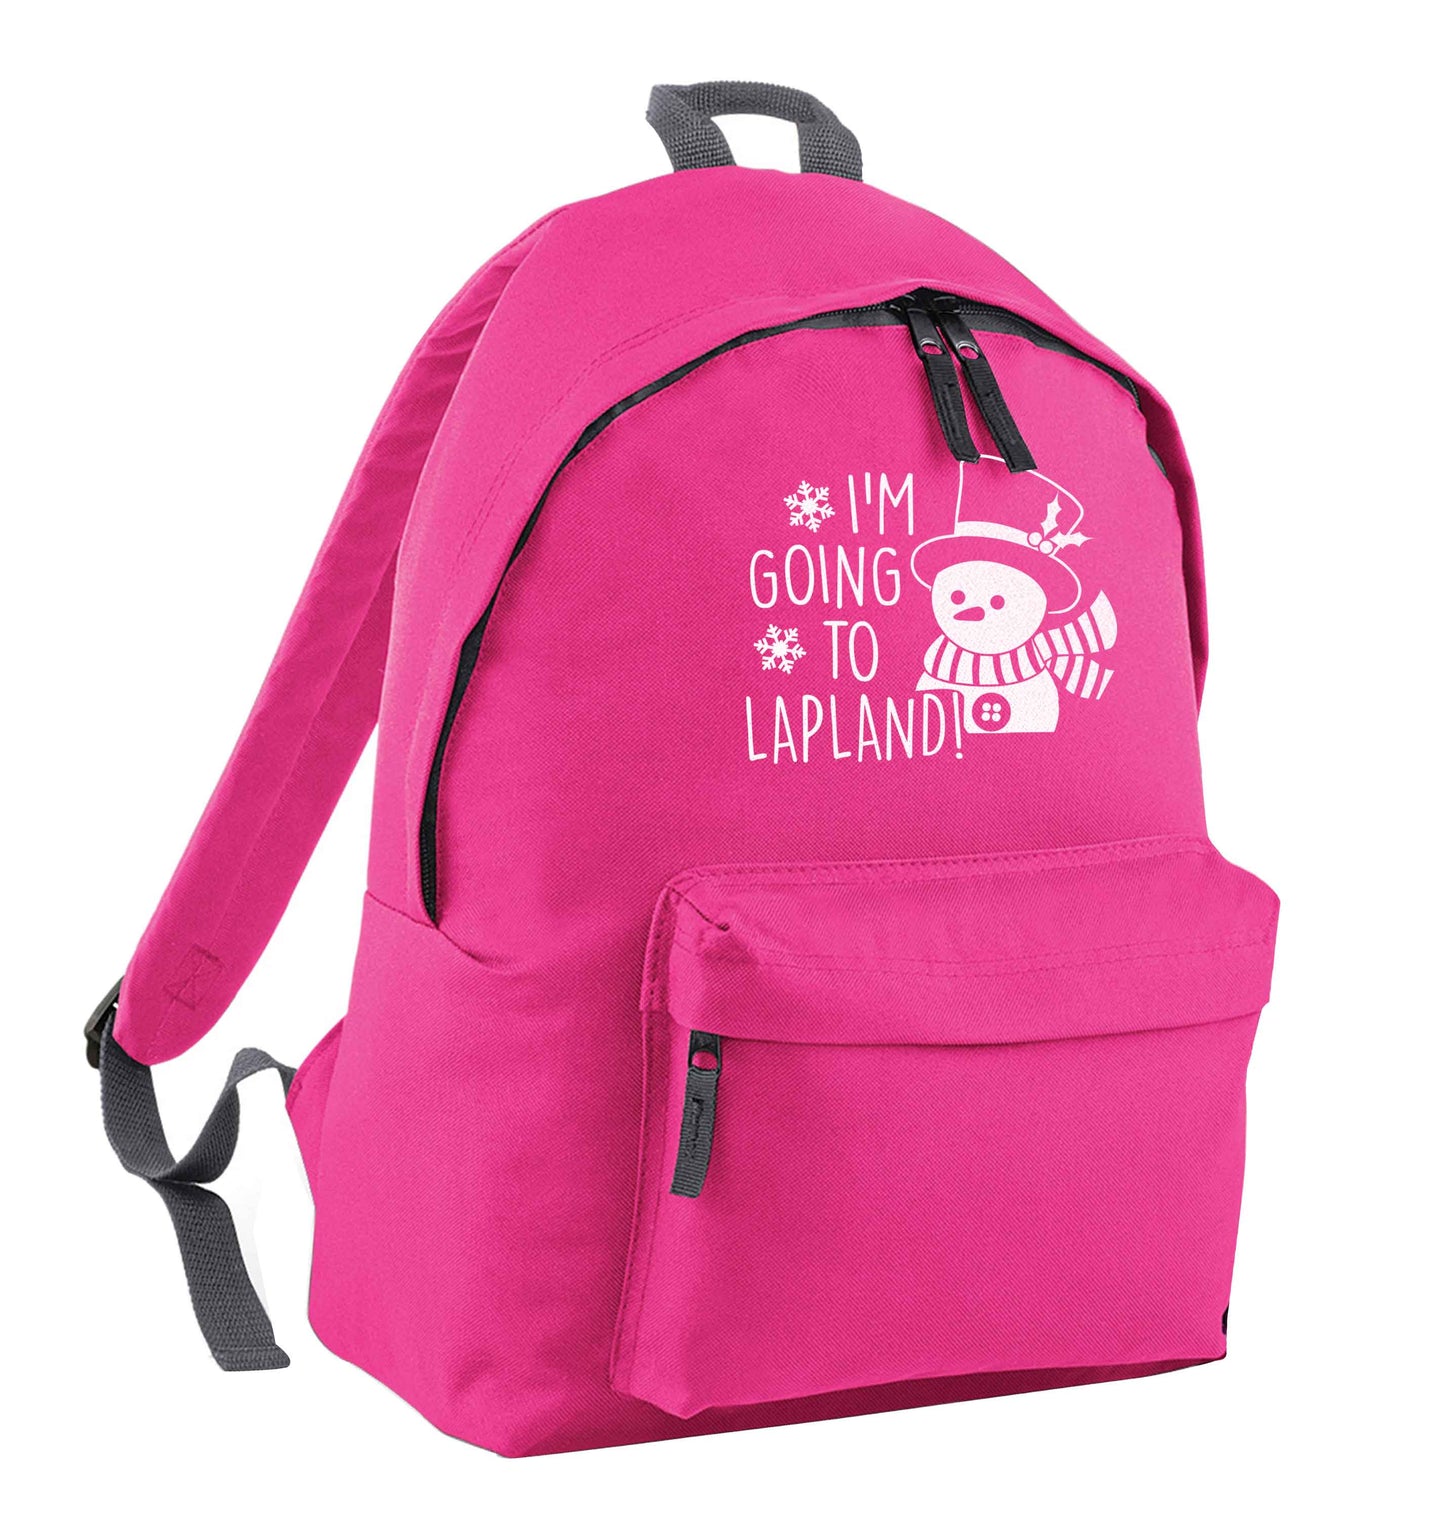 I'm going to Lapland pink children's backpack